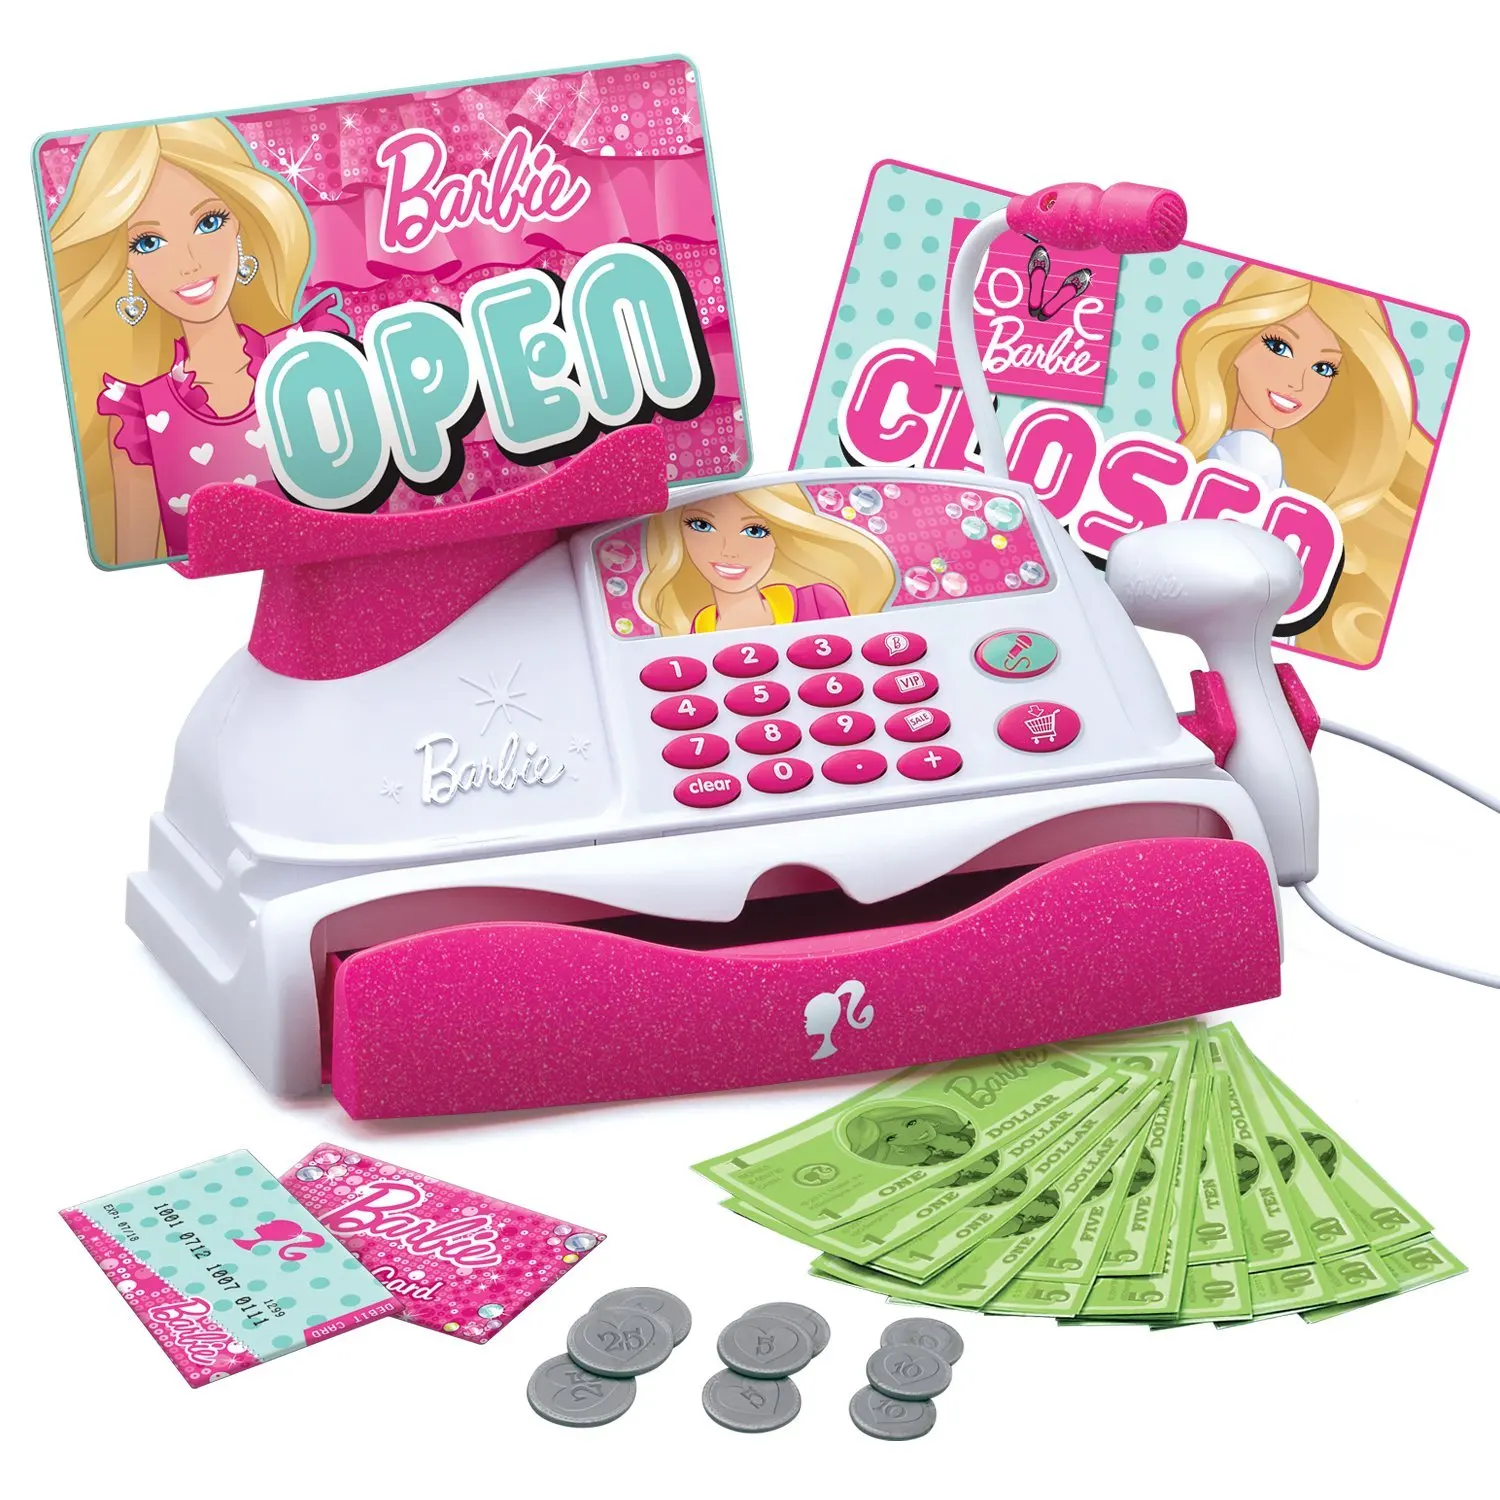 1999 shopping with barbie cash register